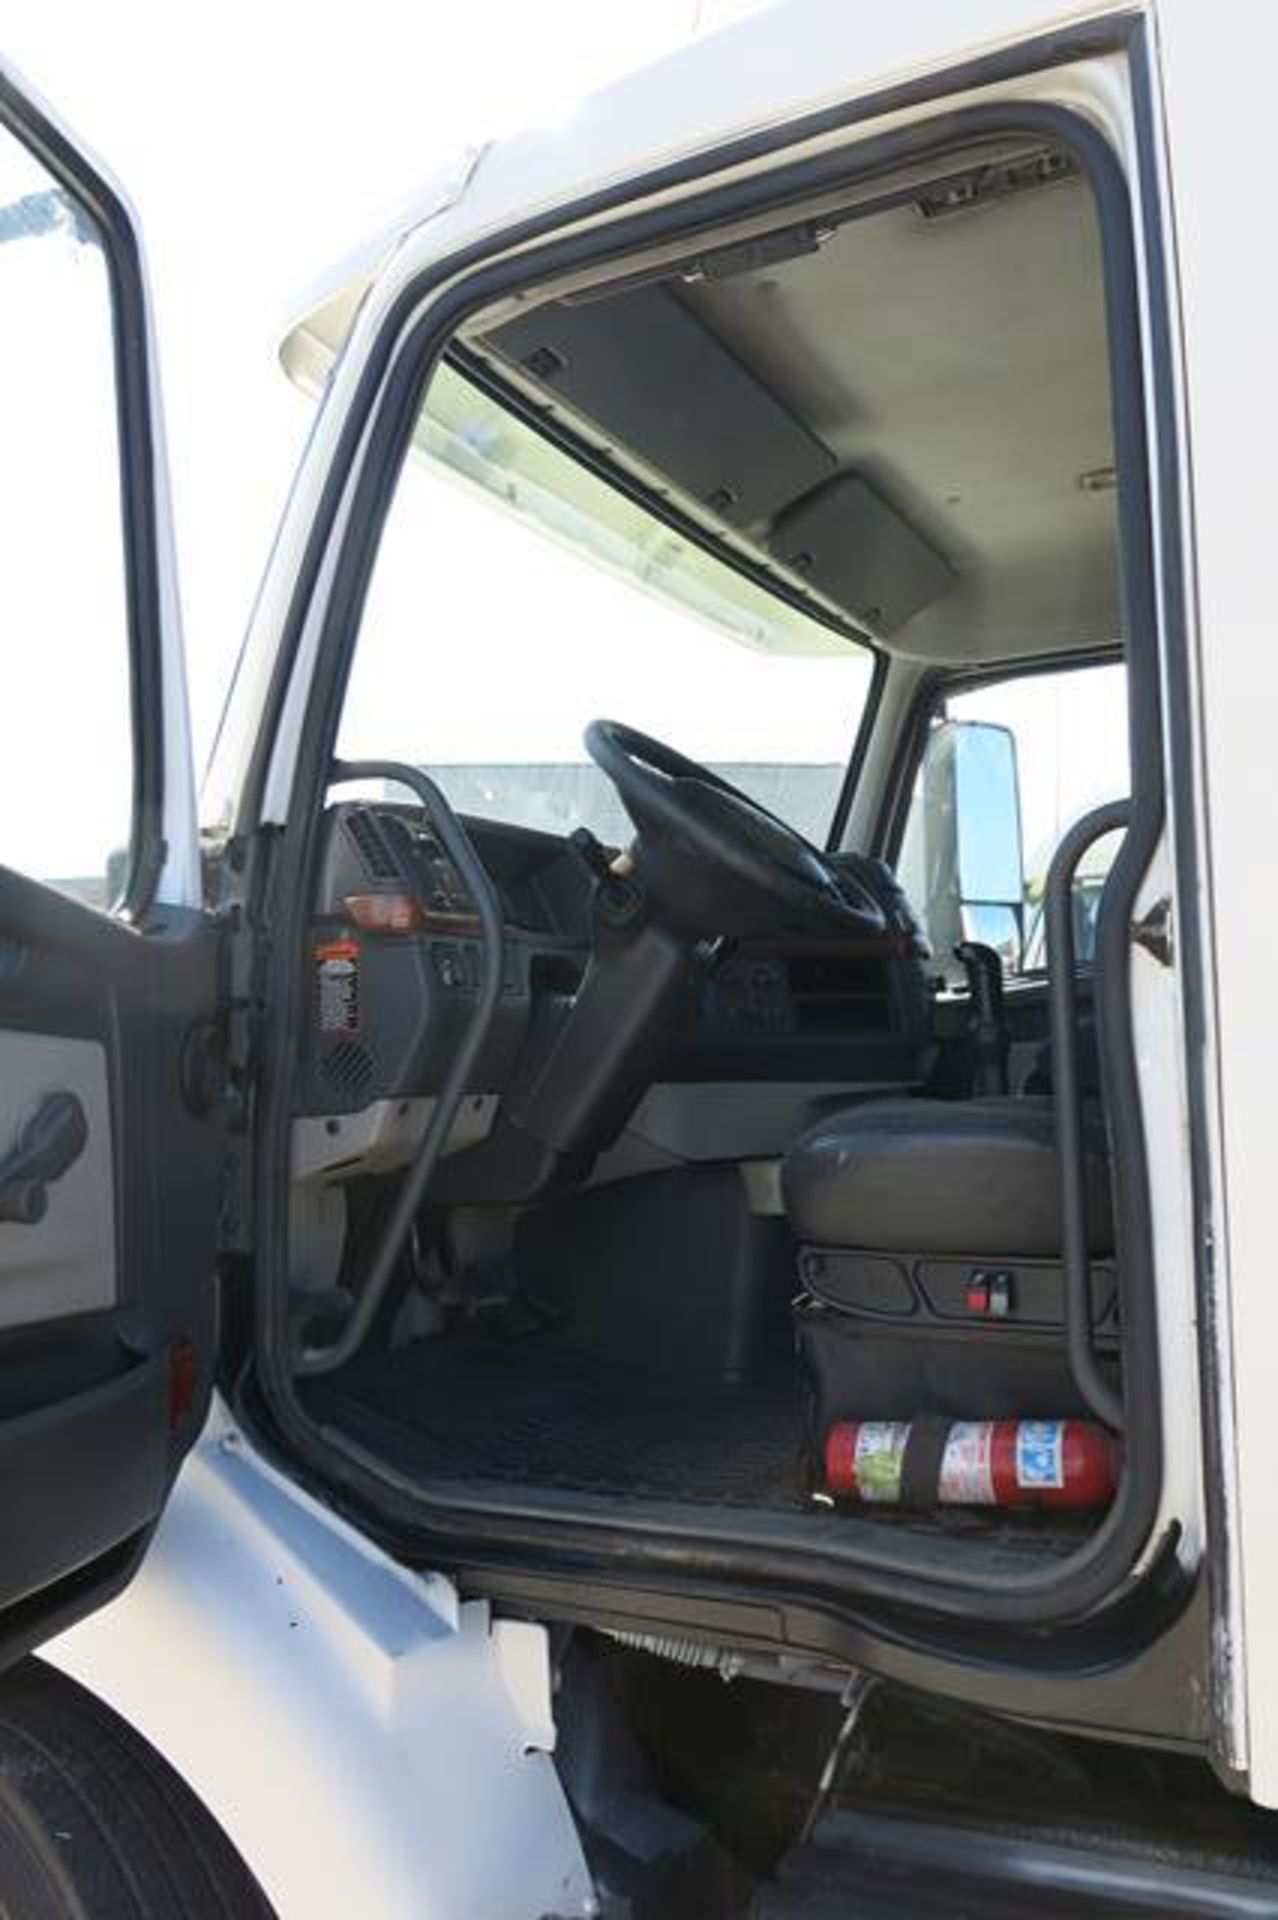 VOLVO, VNM, TRACTOR TRAILER, DAY CAB, D12 ENGINE, EATON FULLER, FR-14210B, 10 SPEED MANUAL - Image 10 of 30